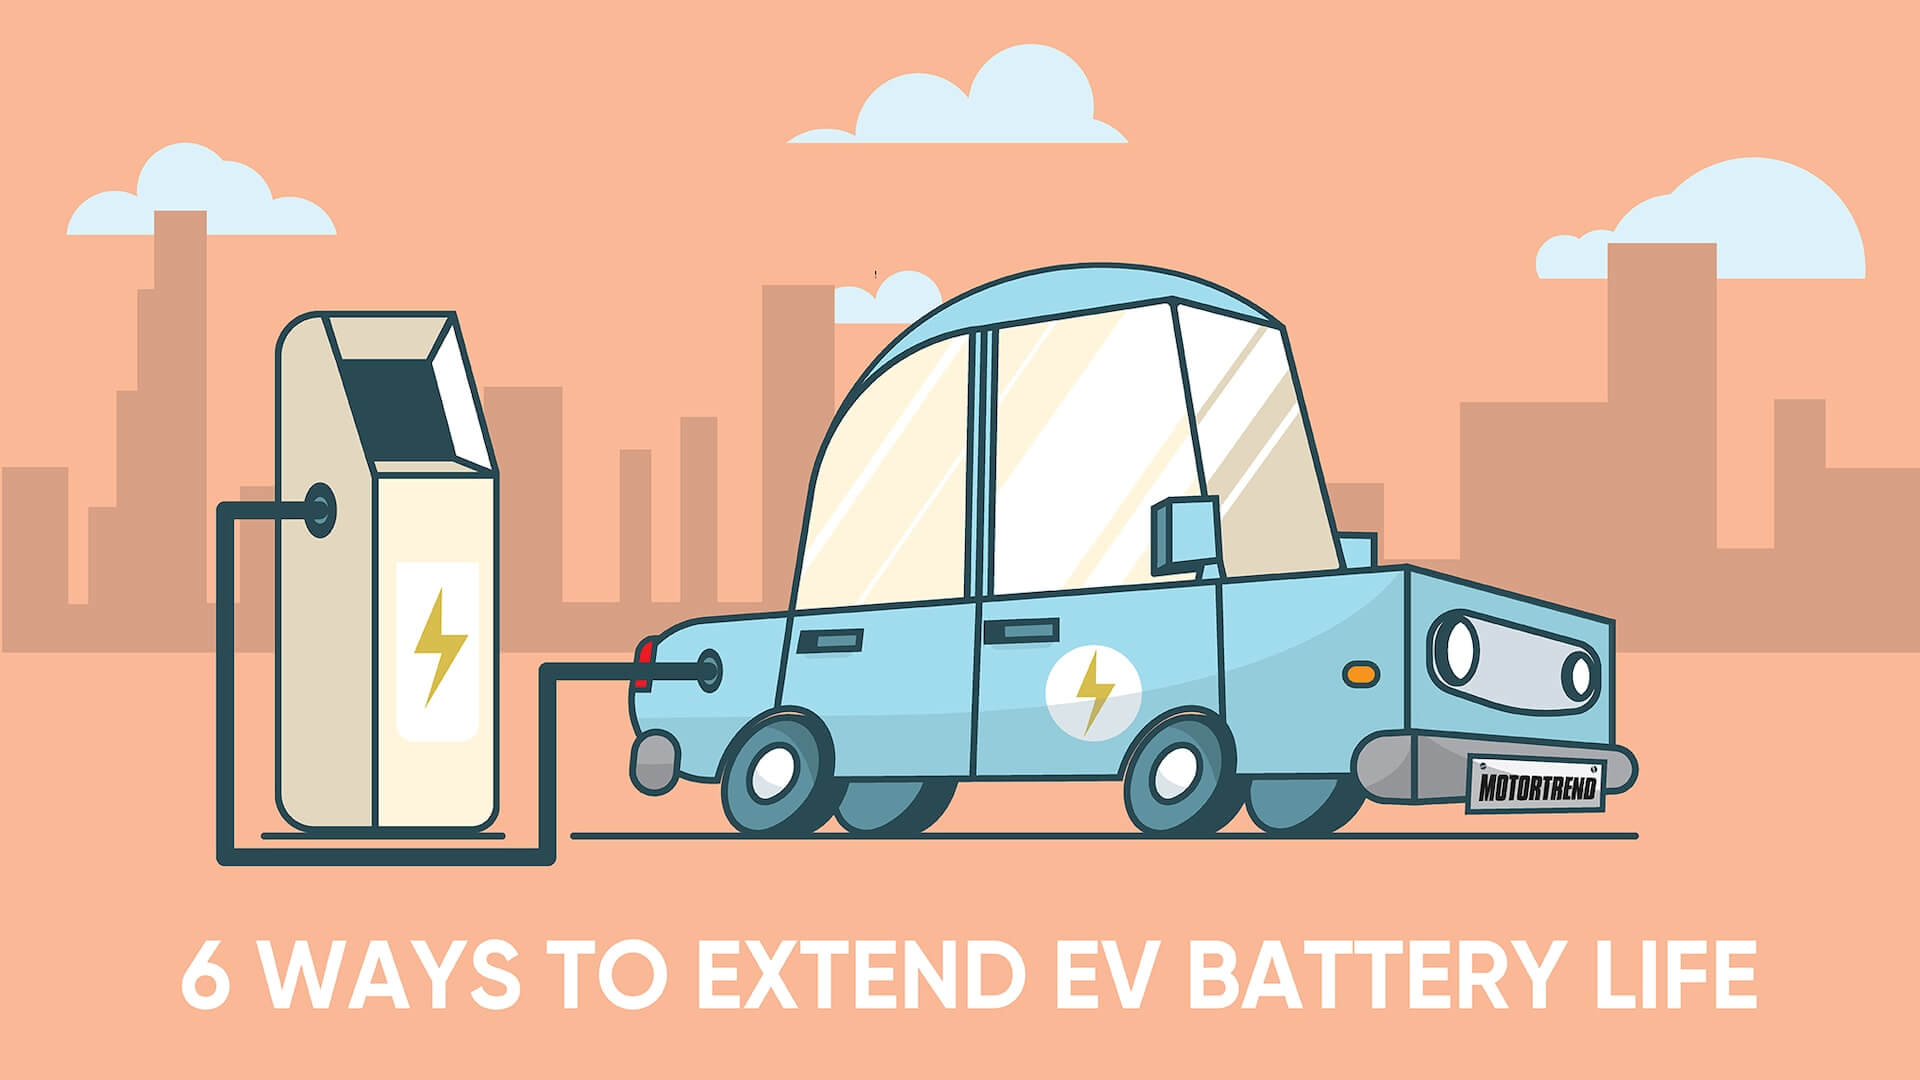 https://e-vehicleinfo.com/electric-vehicle-battery-maintenance-and-replacement-cost/